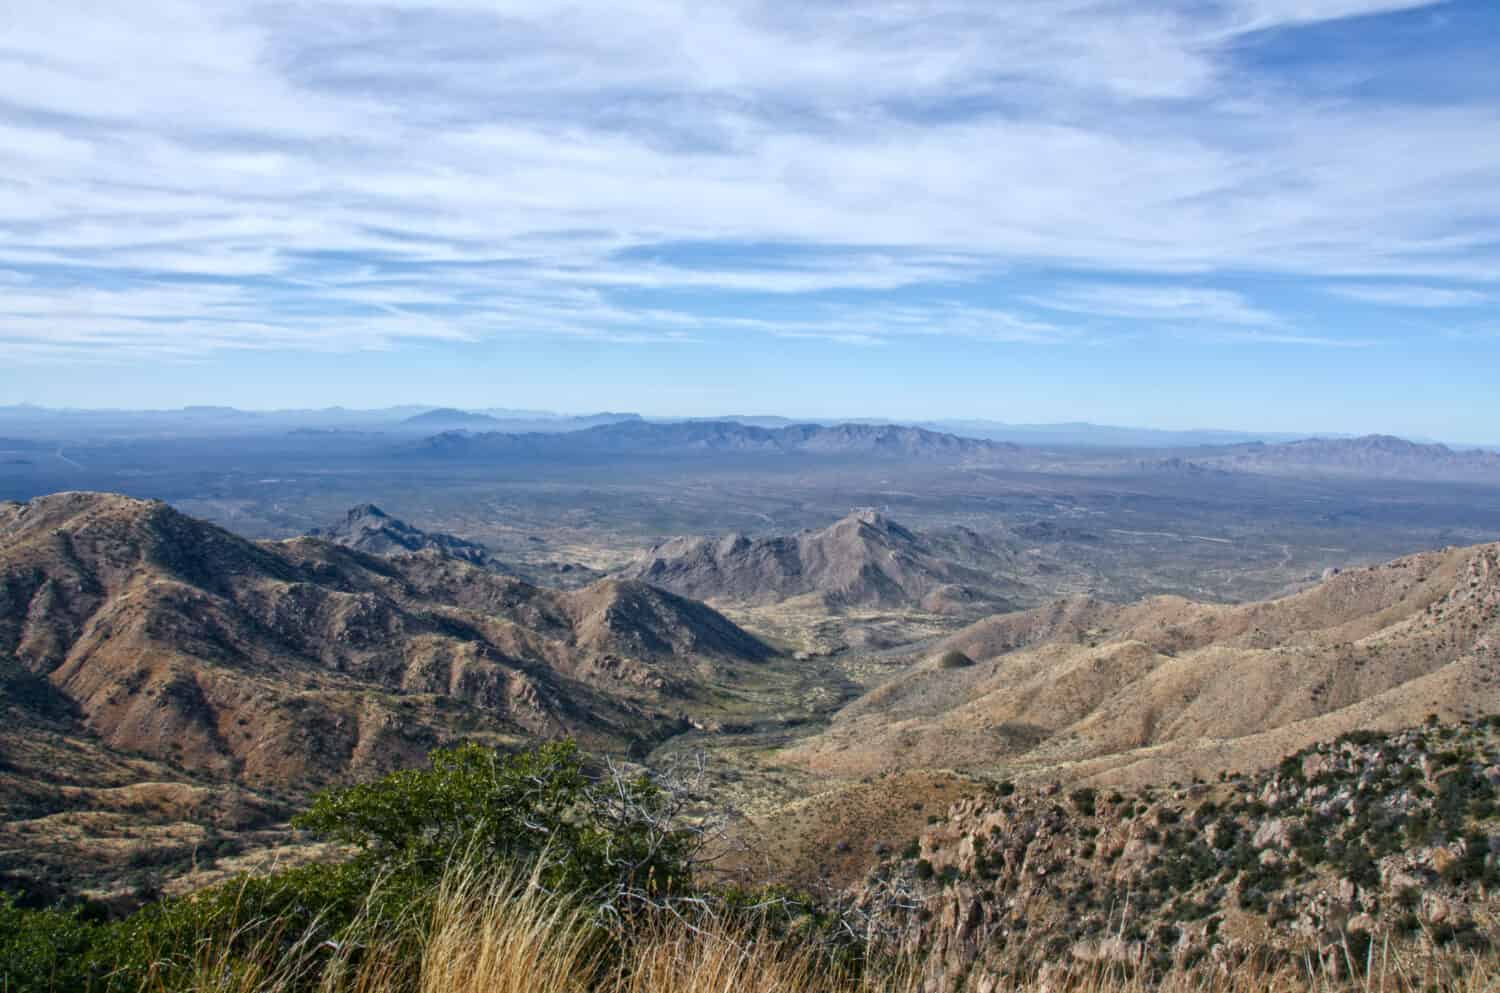 The Quinlan Mountains and Sonoran Desert as viewed from Kitt Peak National Observatory.  Kitt Peak is an astronomical observatory in the Sonoran Desert of Arizona on the Tohono O'odham Indian Reservat